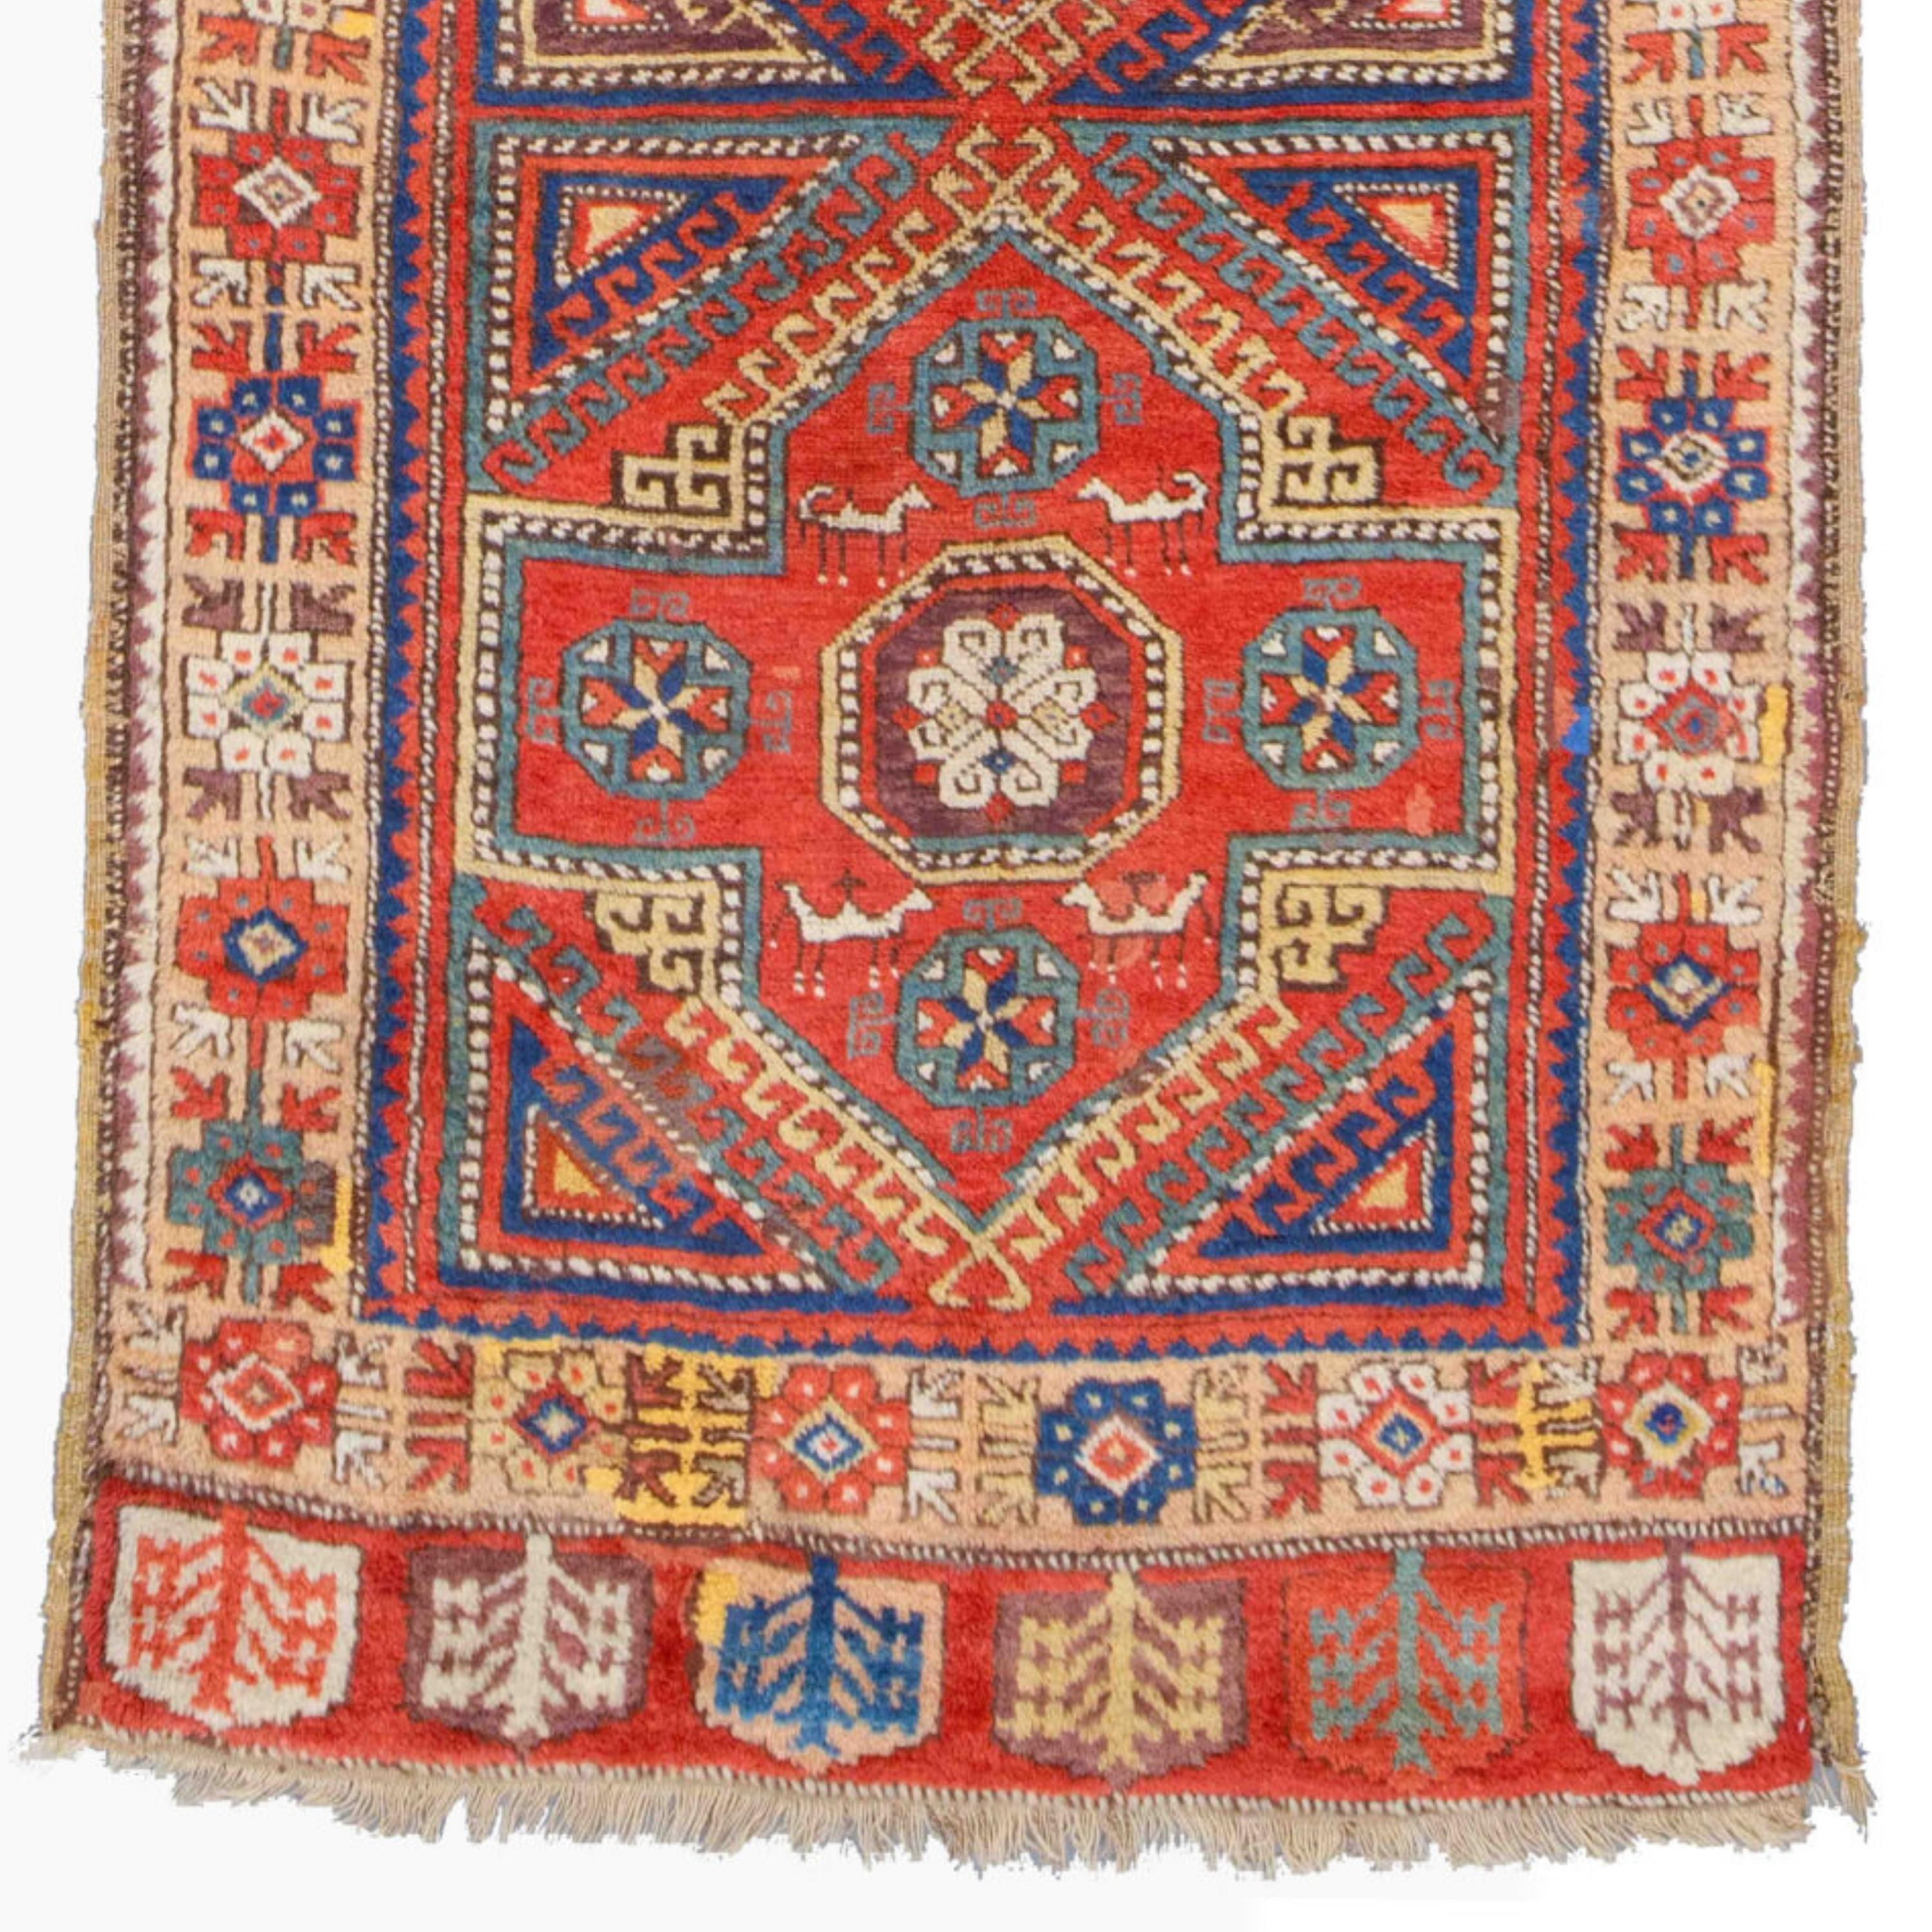 Middle of 19th Century Central Anatolian Konya Rug Size 114 x 315 cm (3,74 x 10,33)

Konya carpet, floor covering handwoven in or near the city of Konya in south-central Turkey. A group of early carpet fragments has been found in the ʿAlāʾ al-Dīn